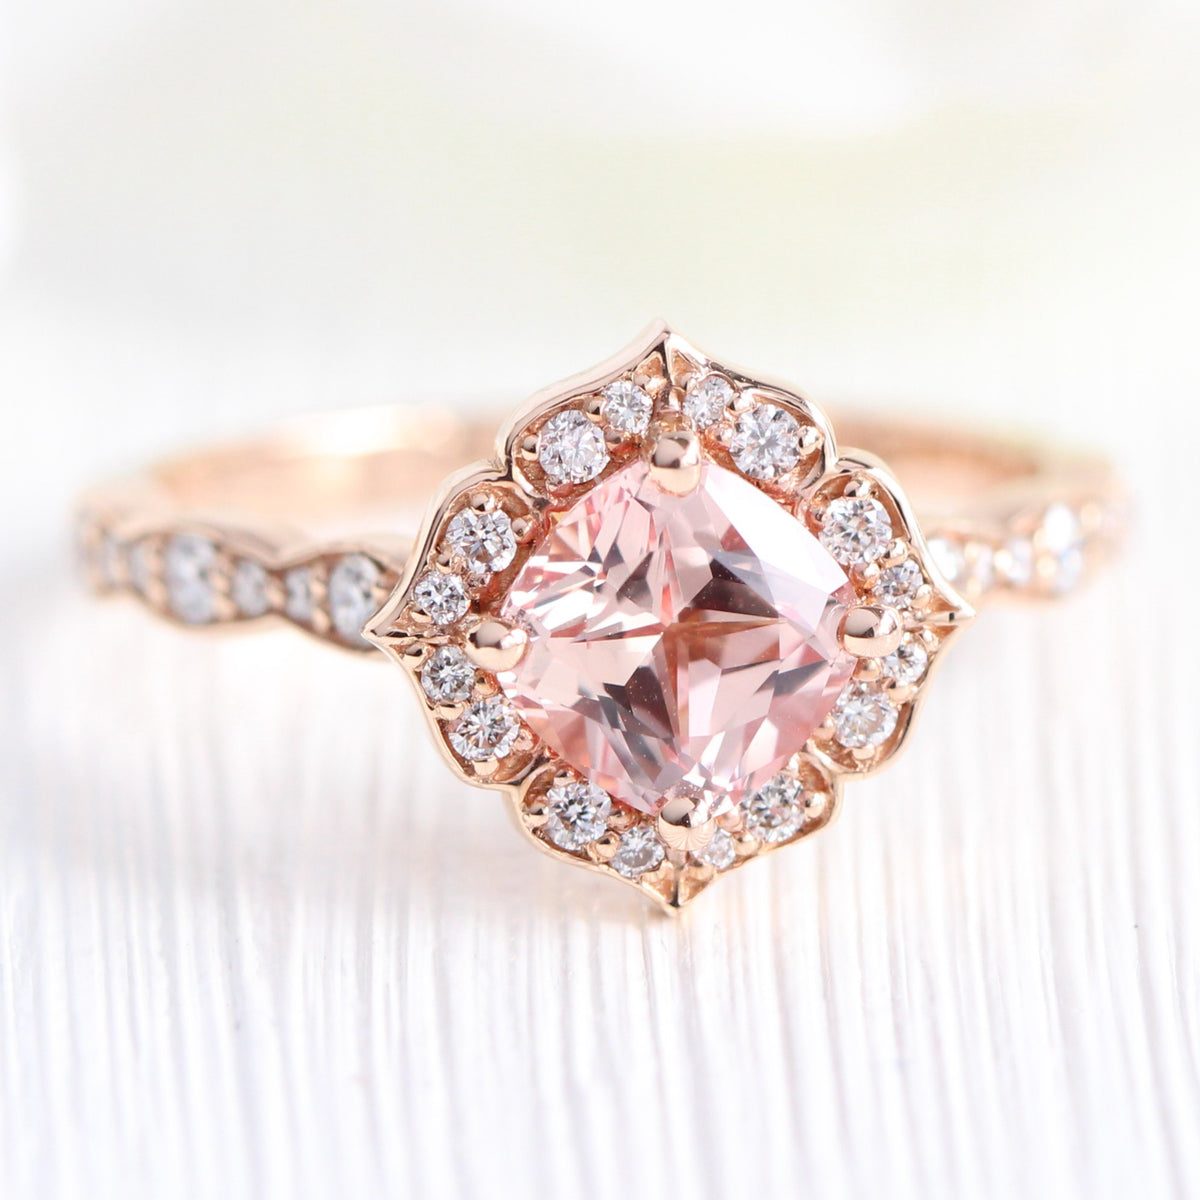 Vintage halo diamond peach sapphire engagement ring stack rose gold by la more design jewelrY